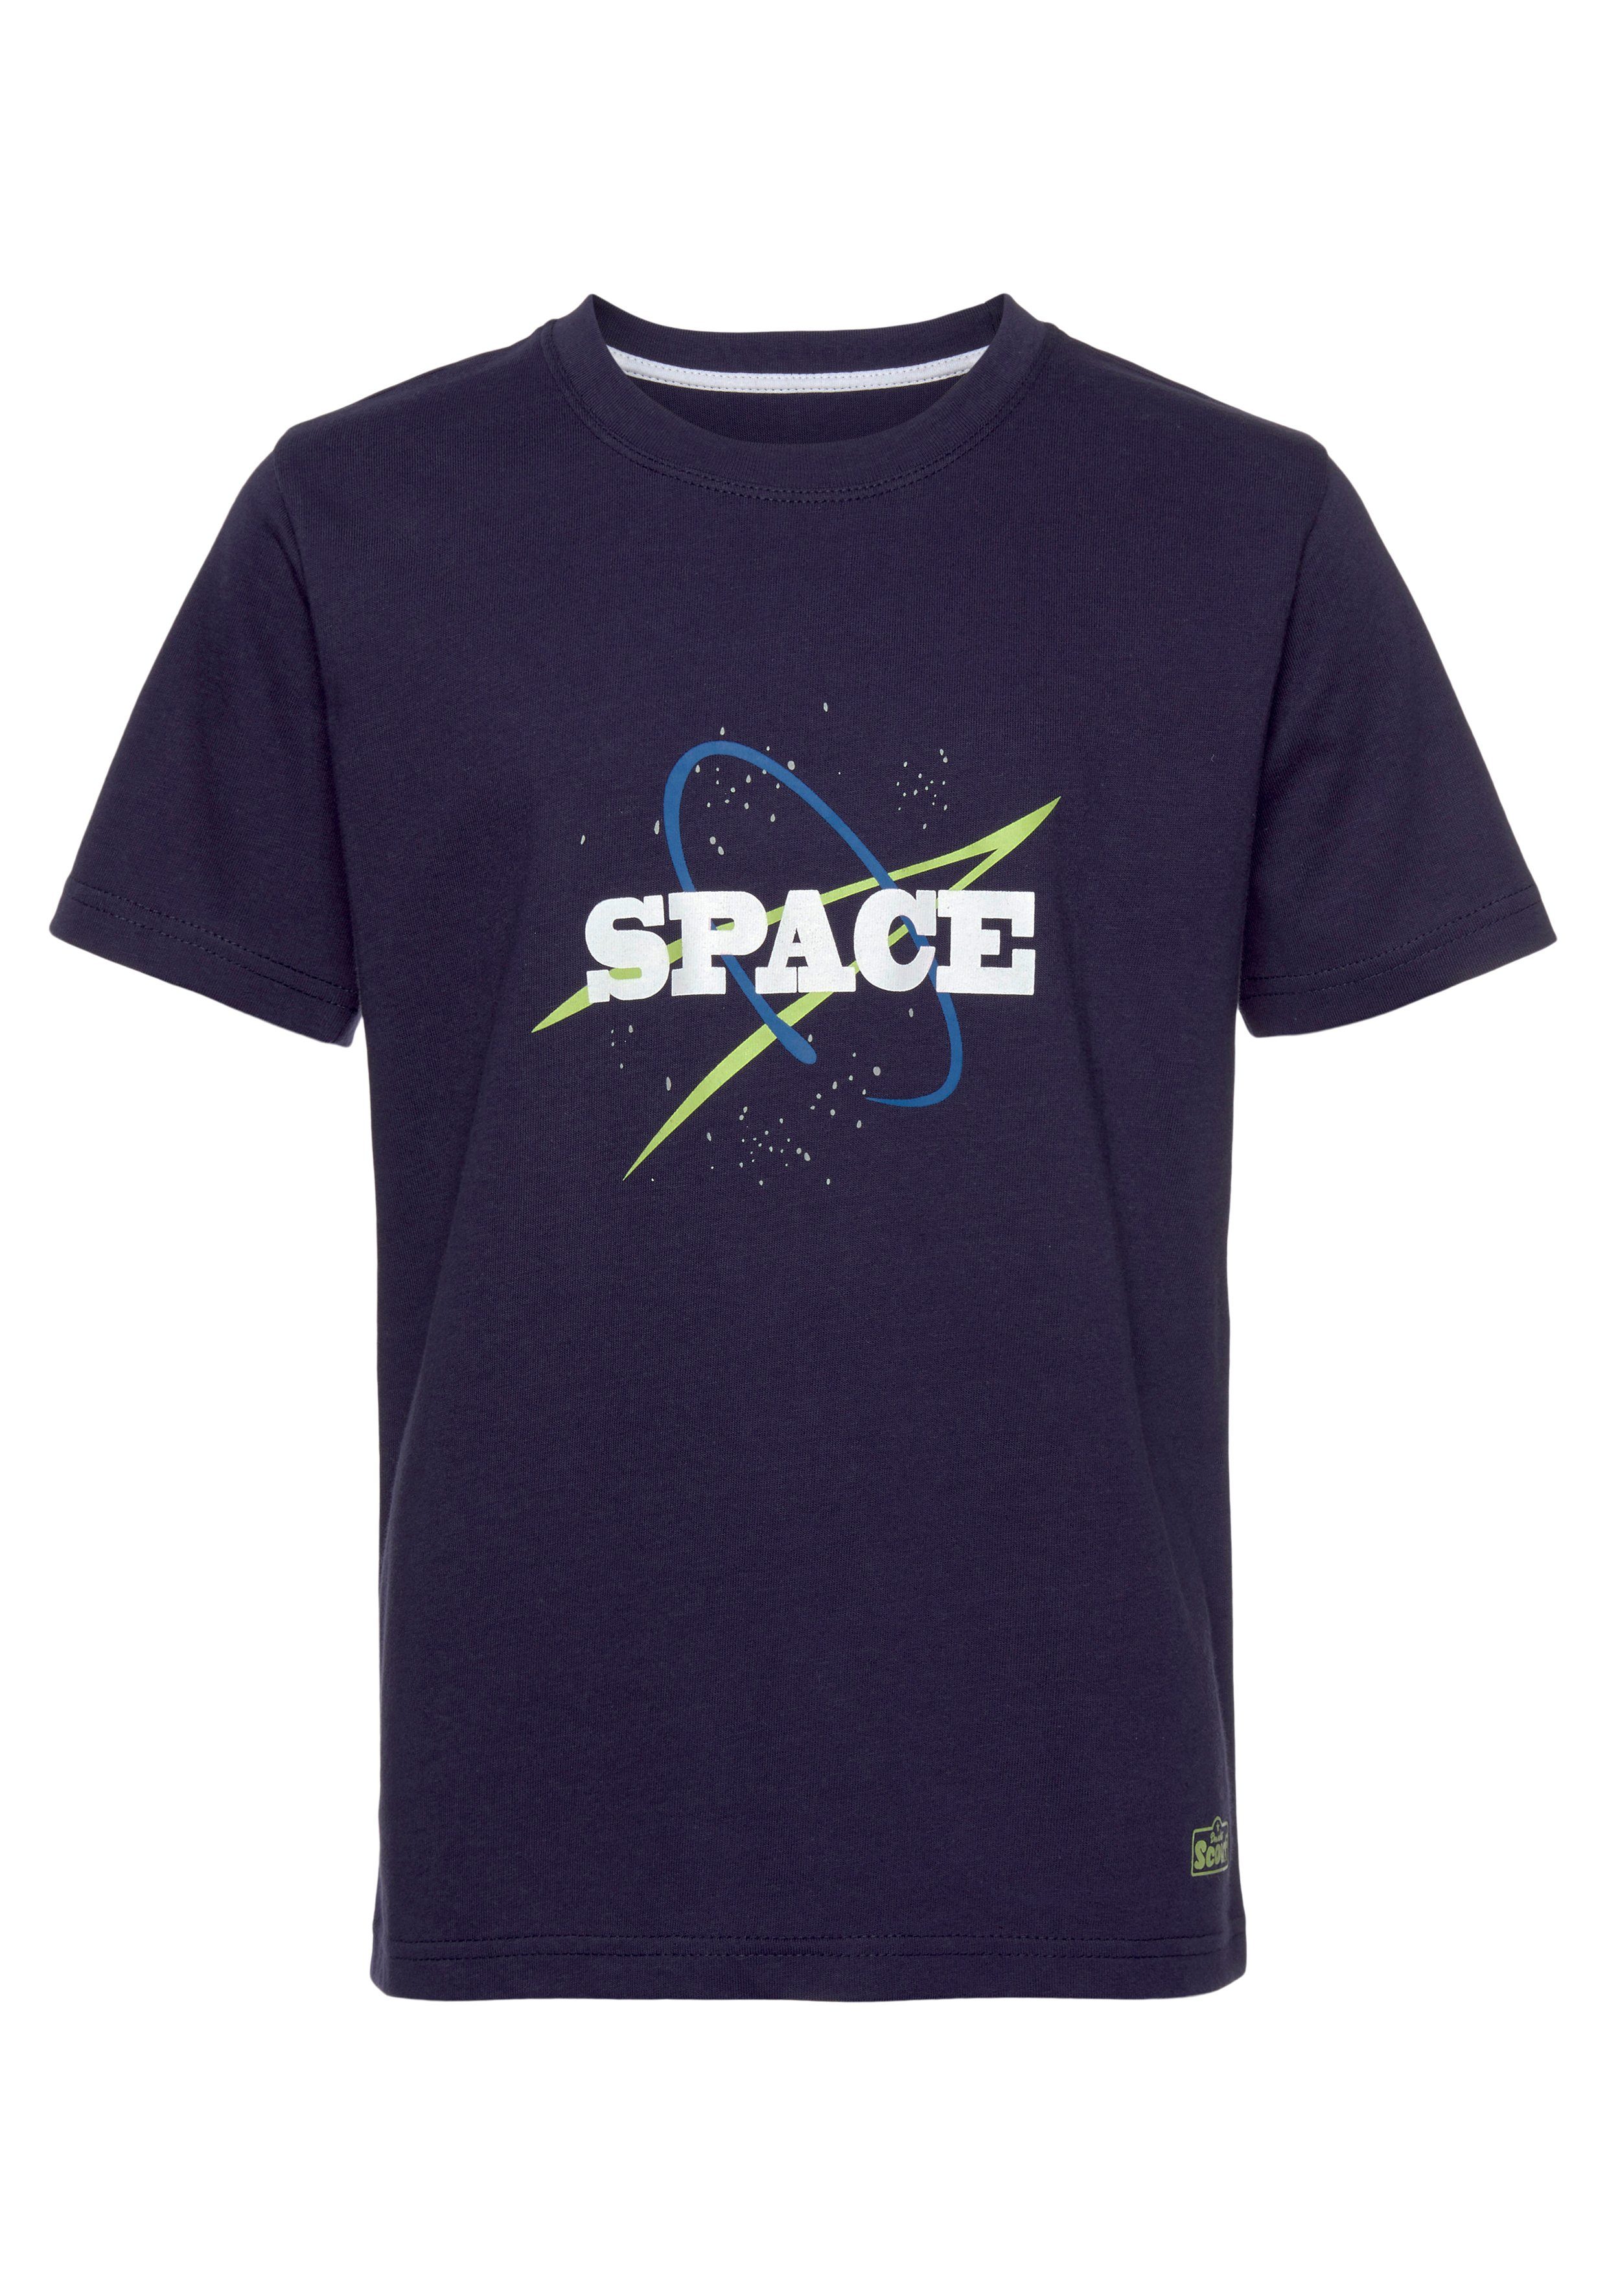 T-Shirt SPACE 2er-Pack) Bio-Baumwolle aus Scout (Packung,